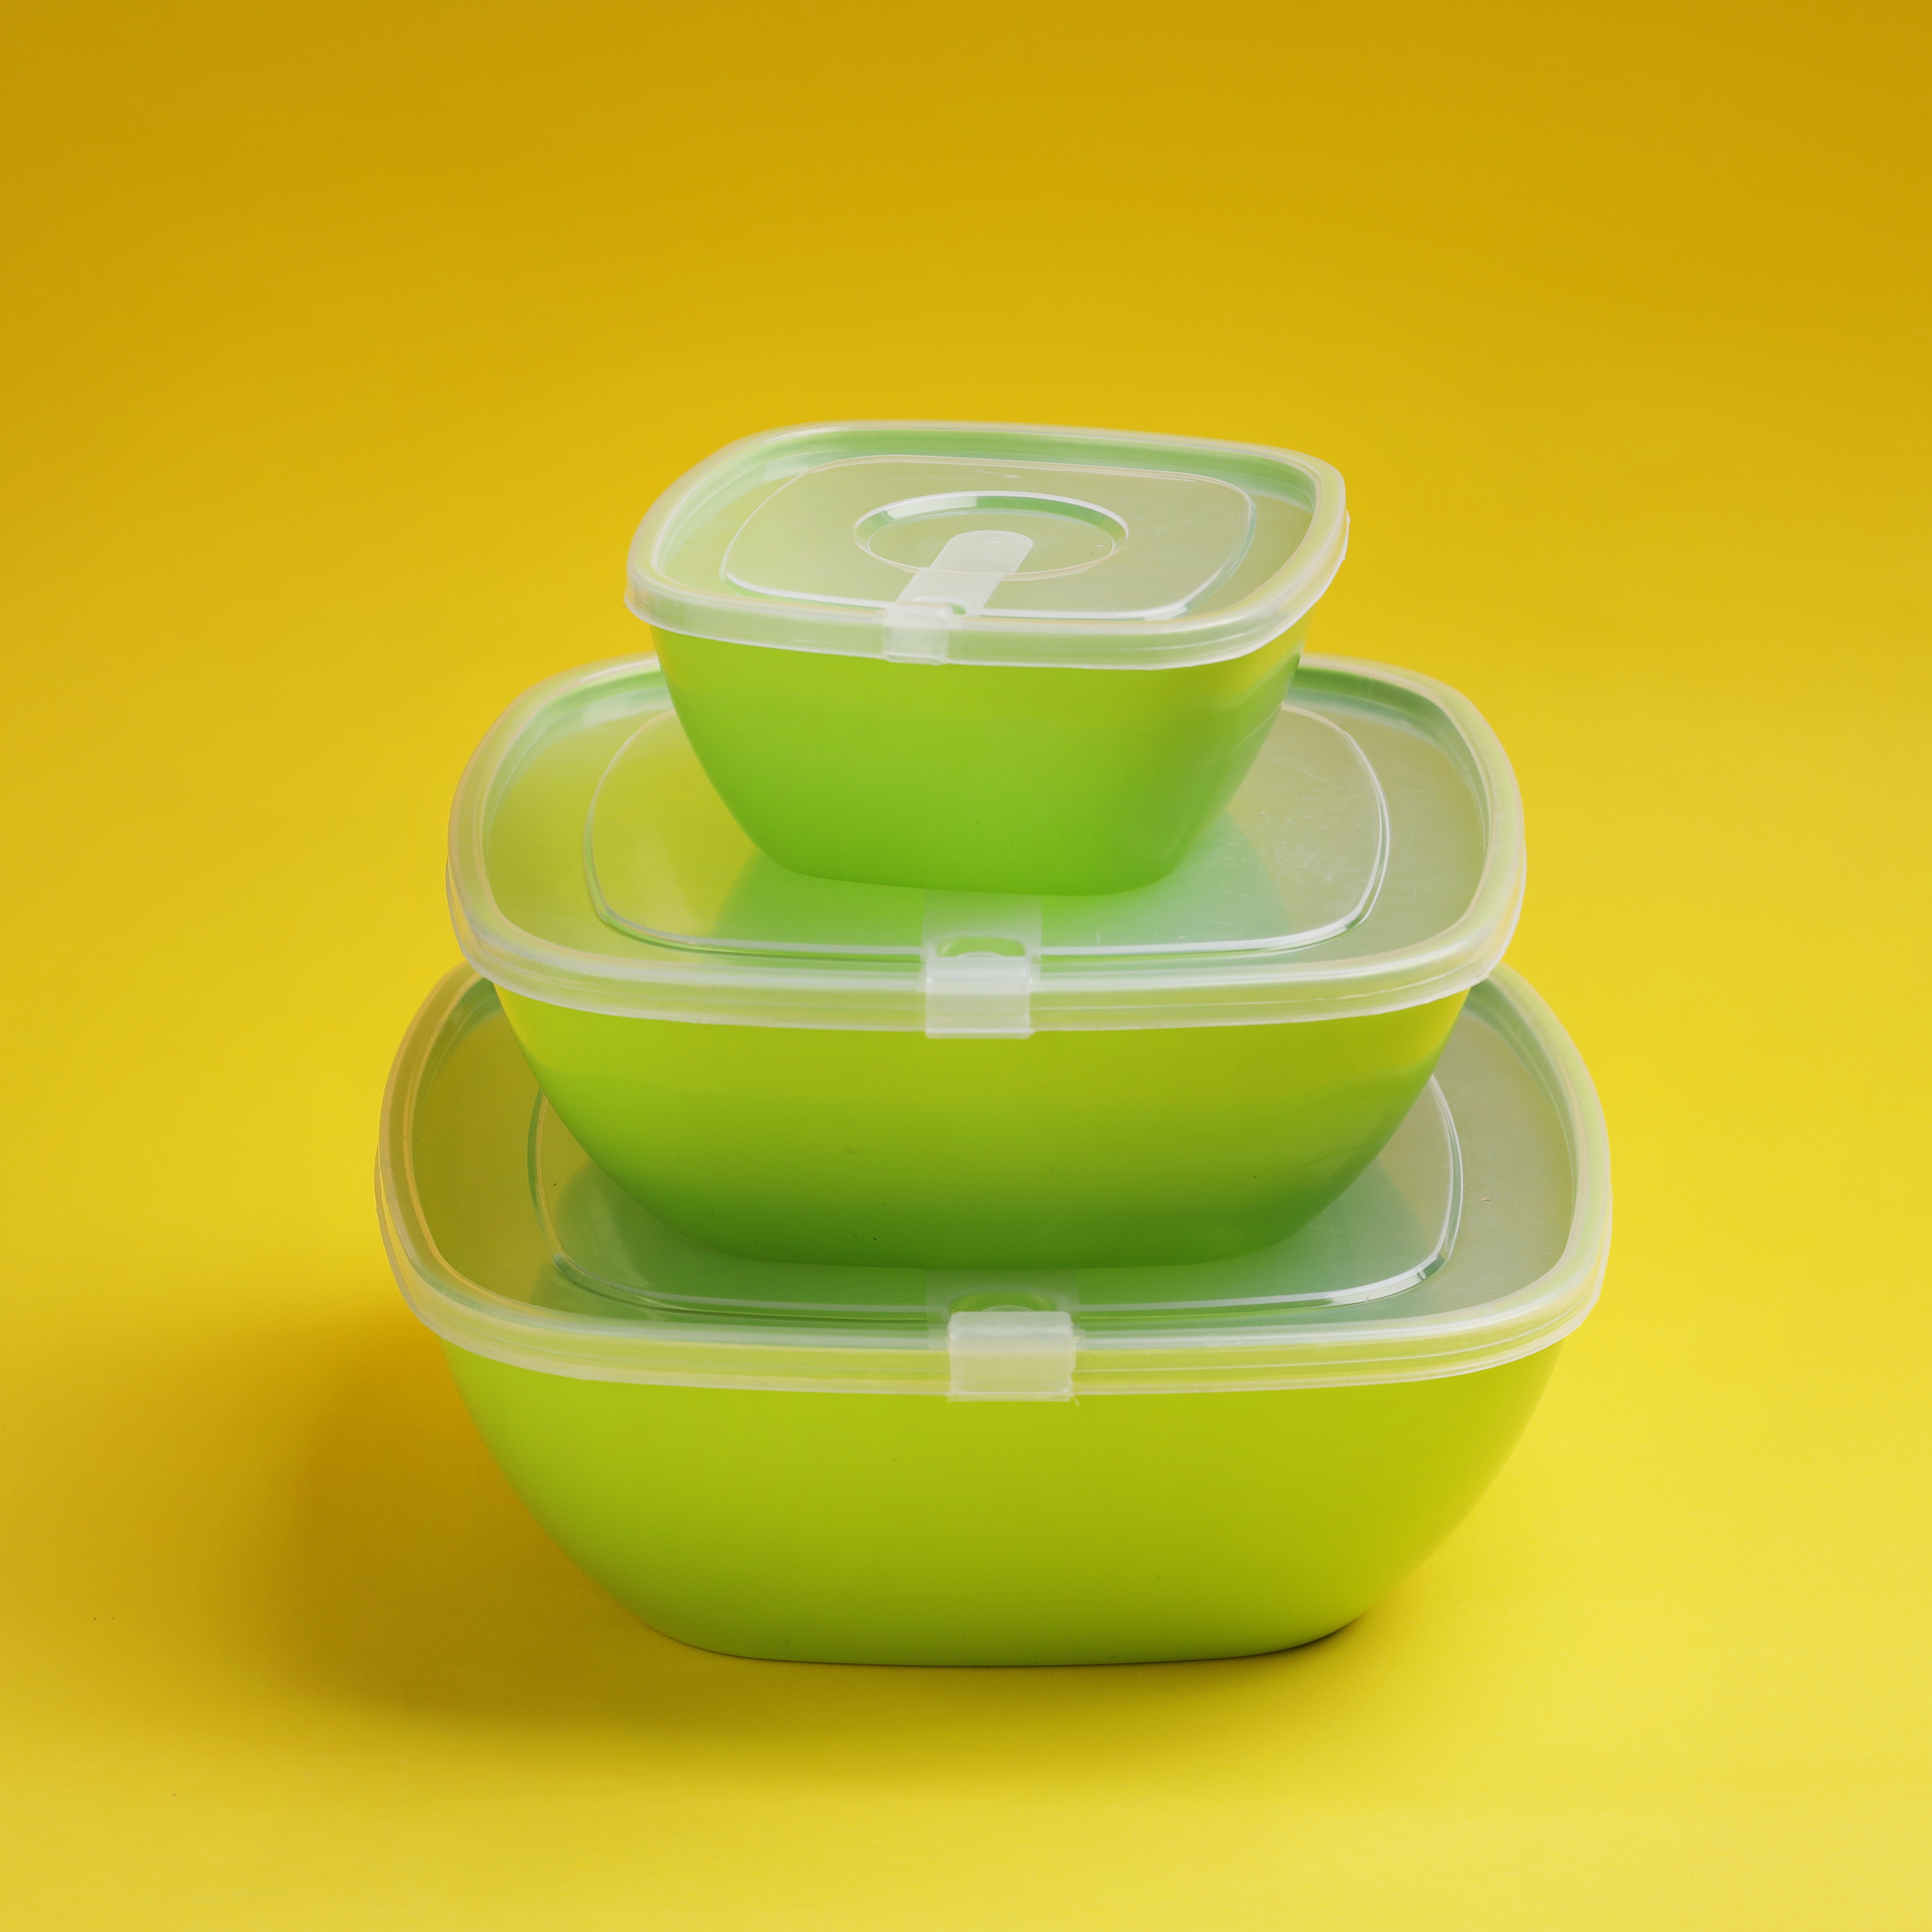 3pcs Bowl Set with Air-Tight Lid, Food Container, RF11009